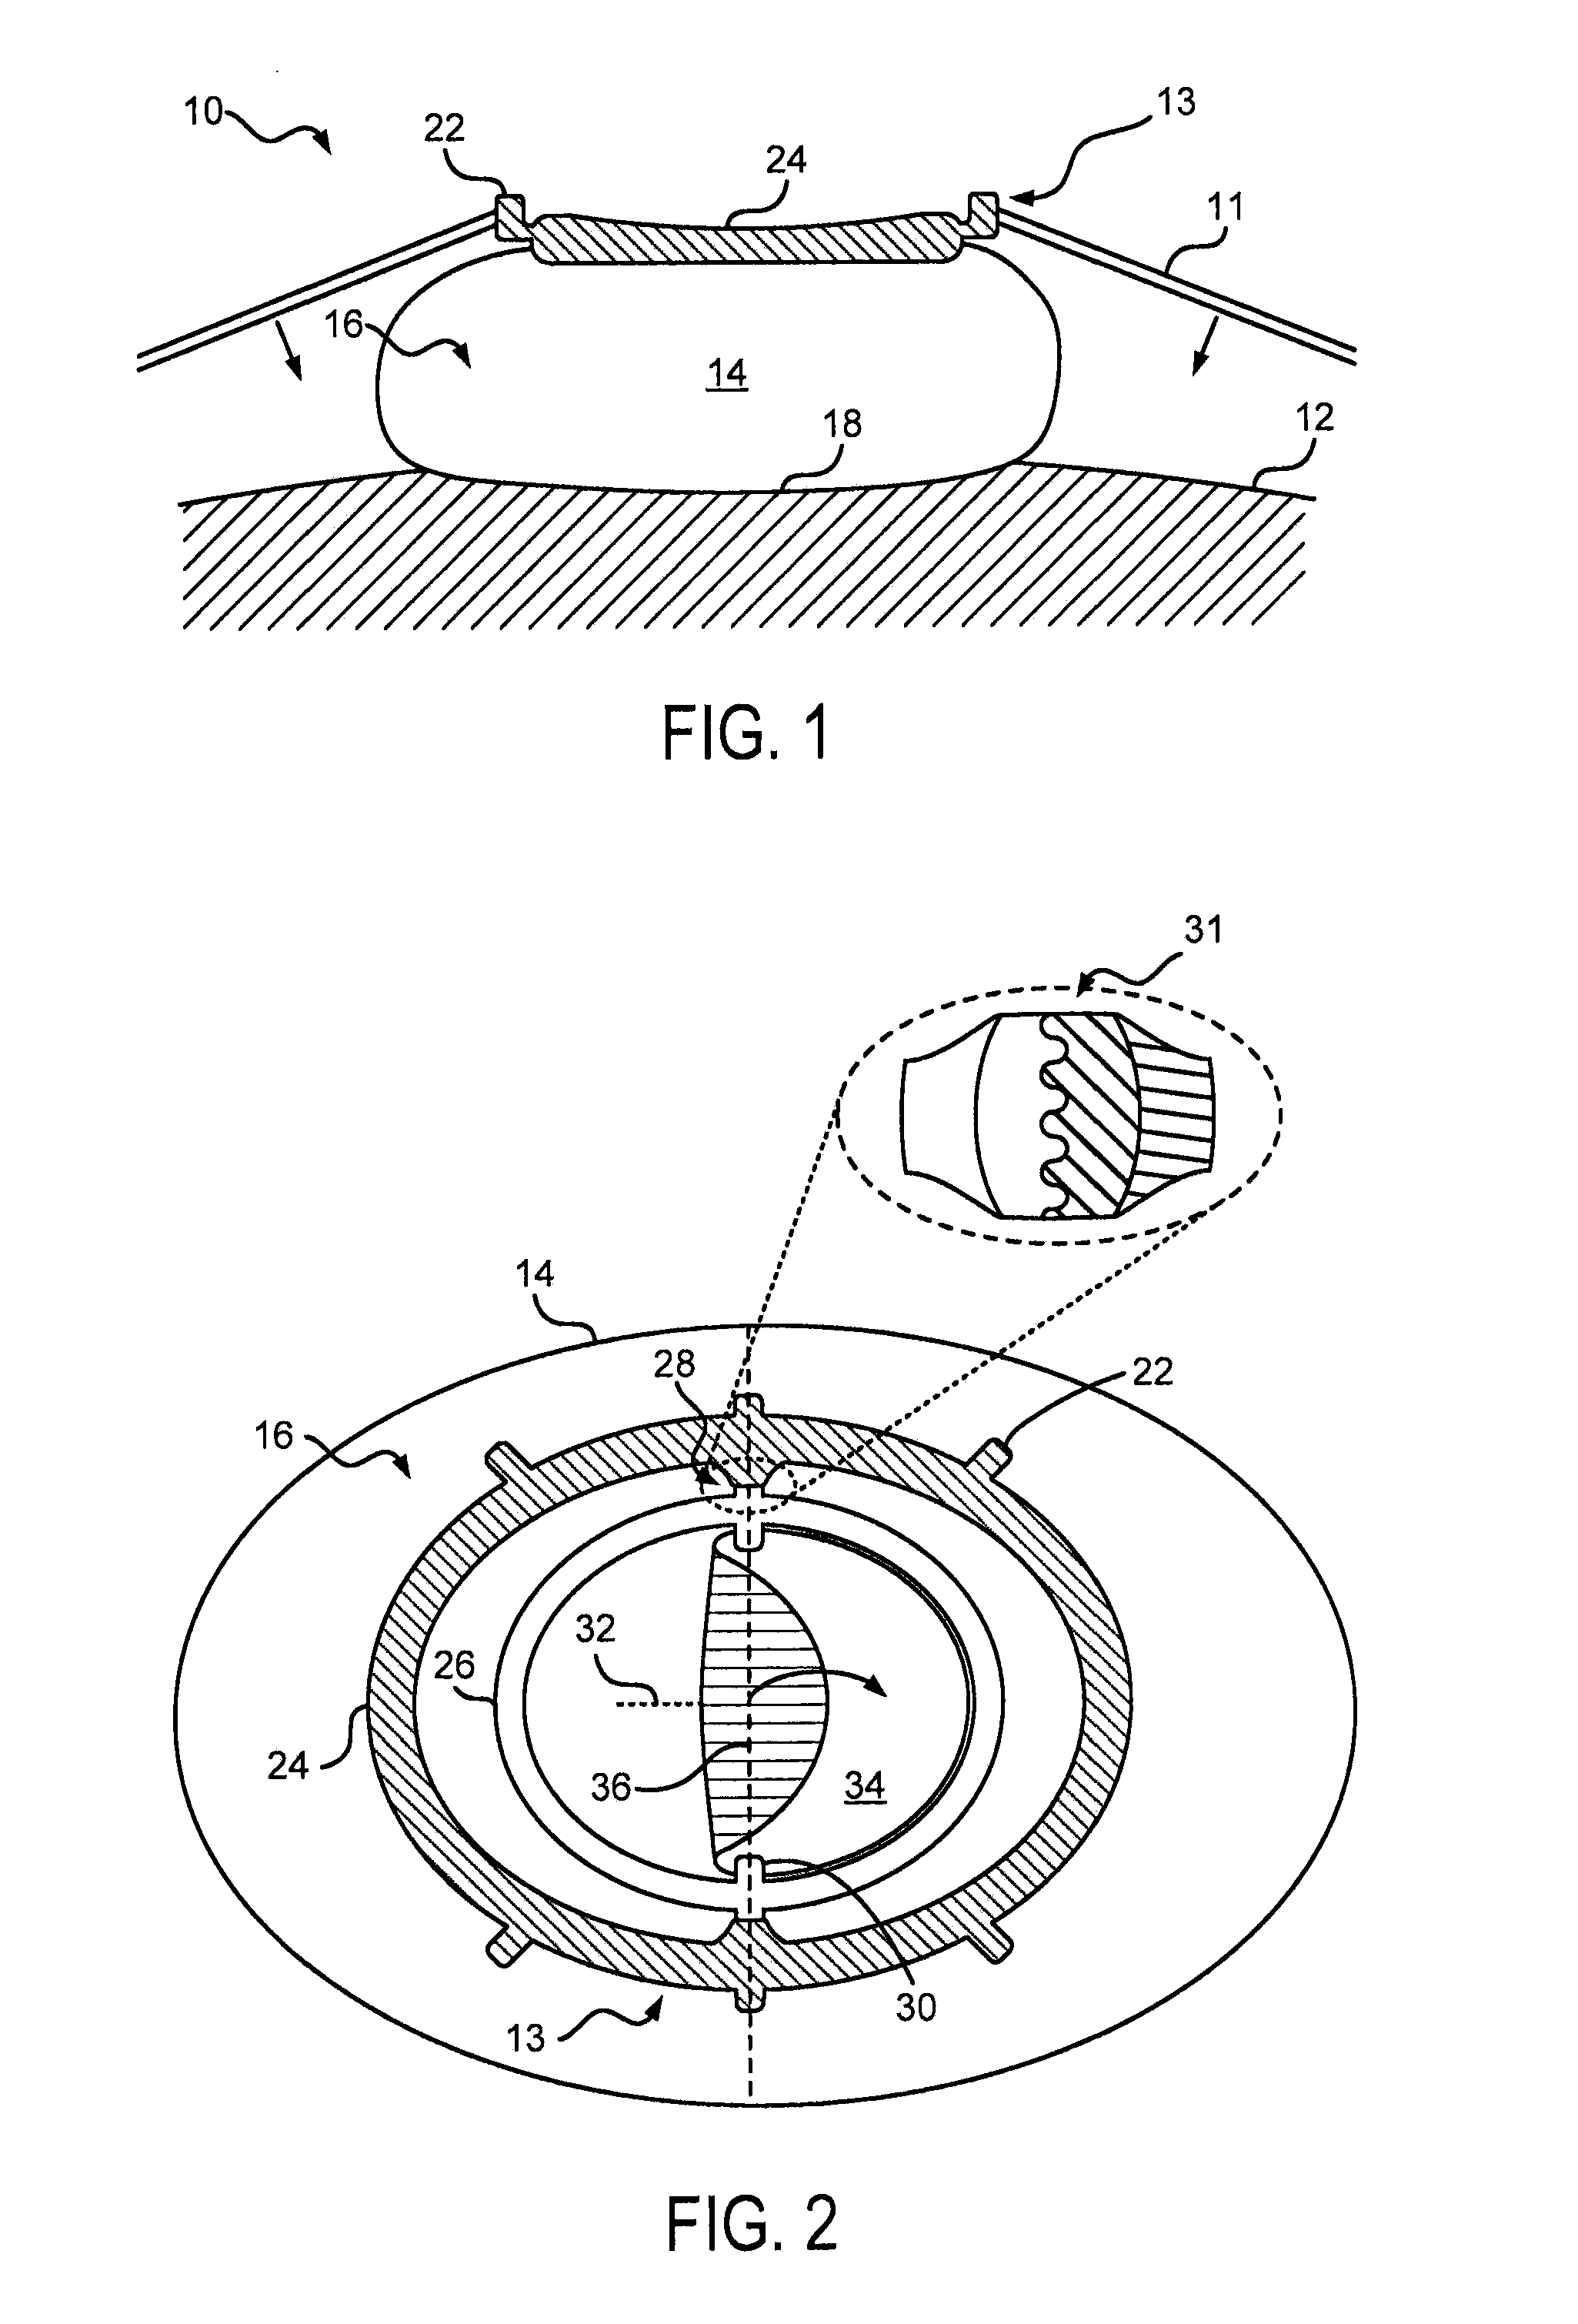 System and Method for Fetal Heart Monitoring Using Ultrasound